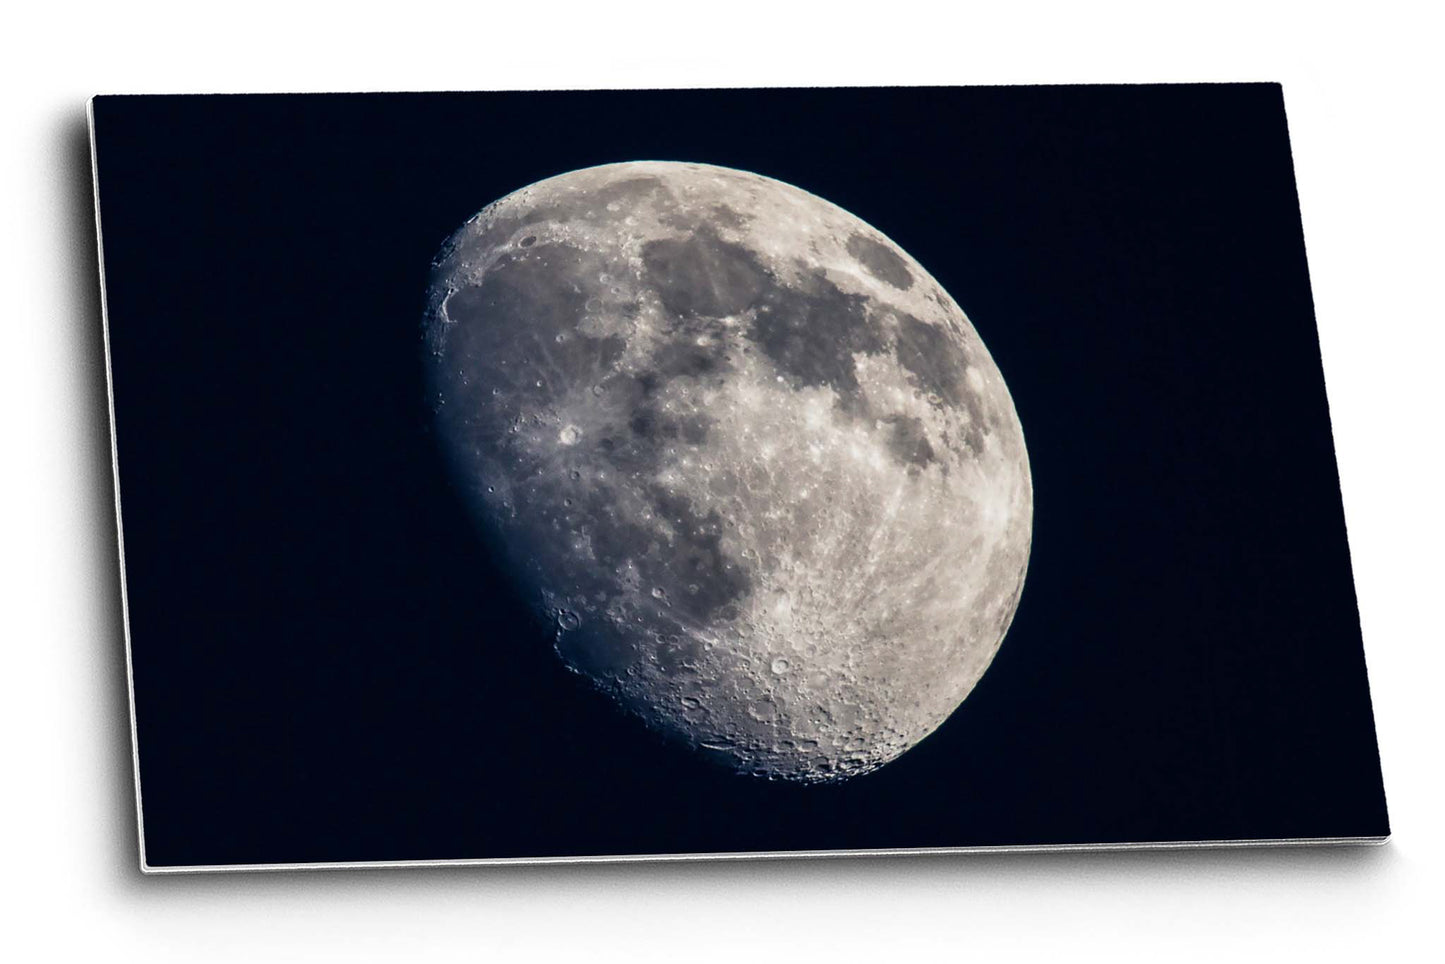 Lunar metal print on aluminum of a waxing gibbous moon with visible craters in the Oklahoma night sky by Sean Ramsey of Southern Plains Photography.